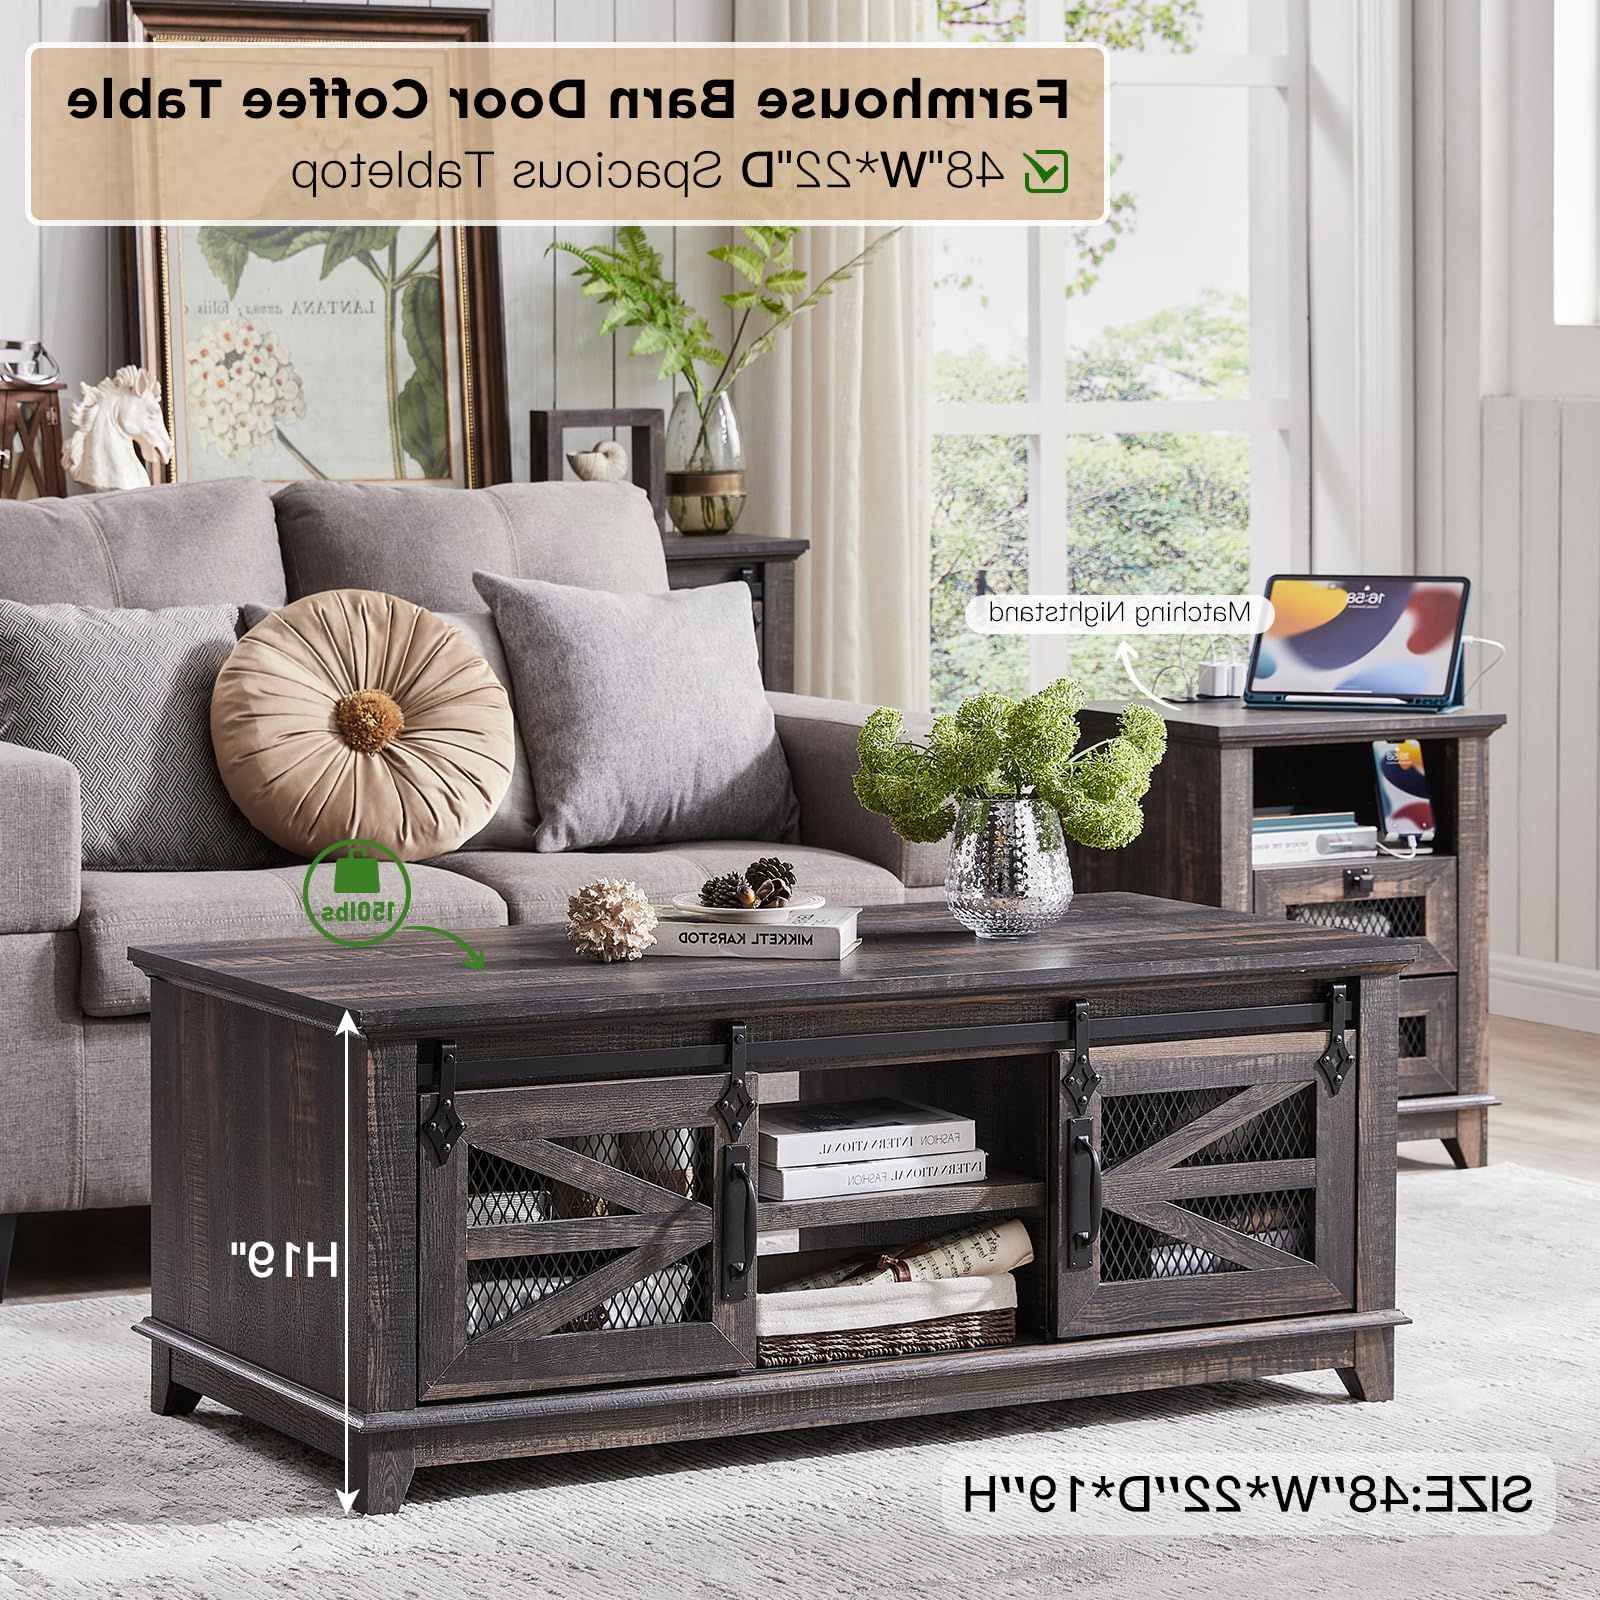 Coffee Tables With Storage And Barn Doors For Trendy Amazon: Okd 48'' Coffee Table With Storage & Sliding Barn Doors,  Farmhouse & Industrial Center Table W/adjustable Shelves For Living Room,  Rectangular Black Rustic Cocktail Table W/2 Cabinets, Dark Rustic Oak : (View 3 of 10)